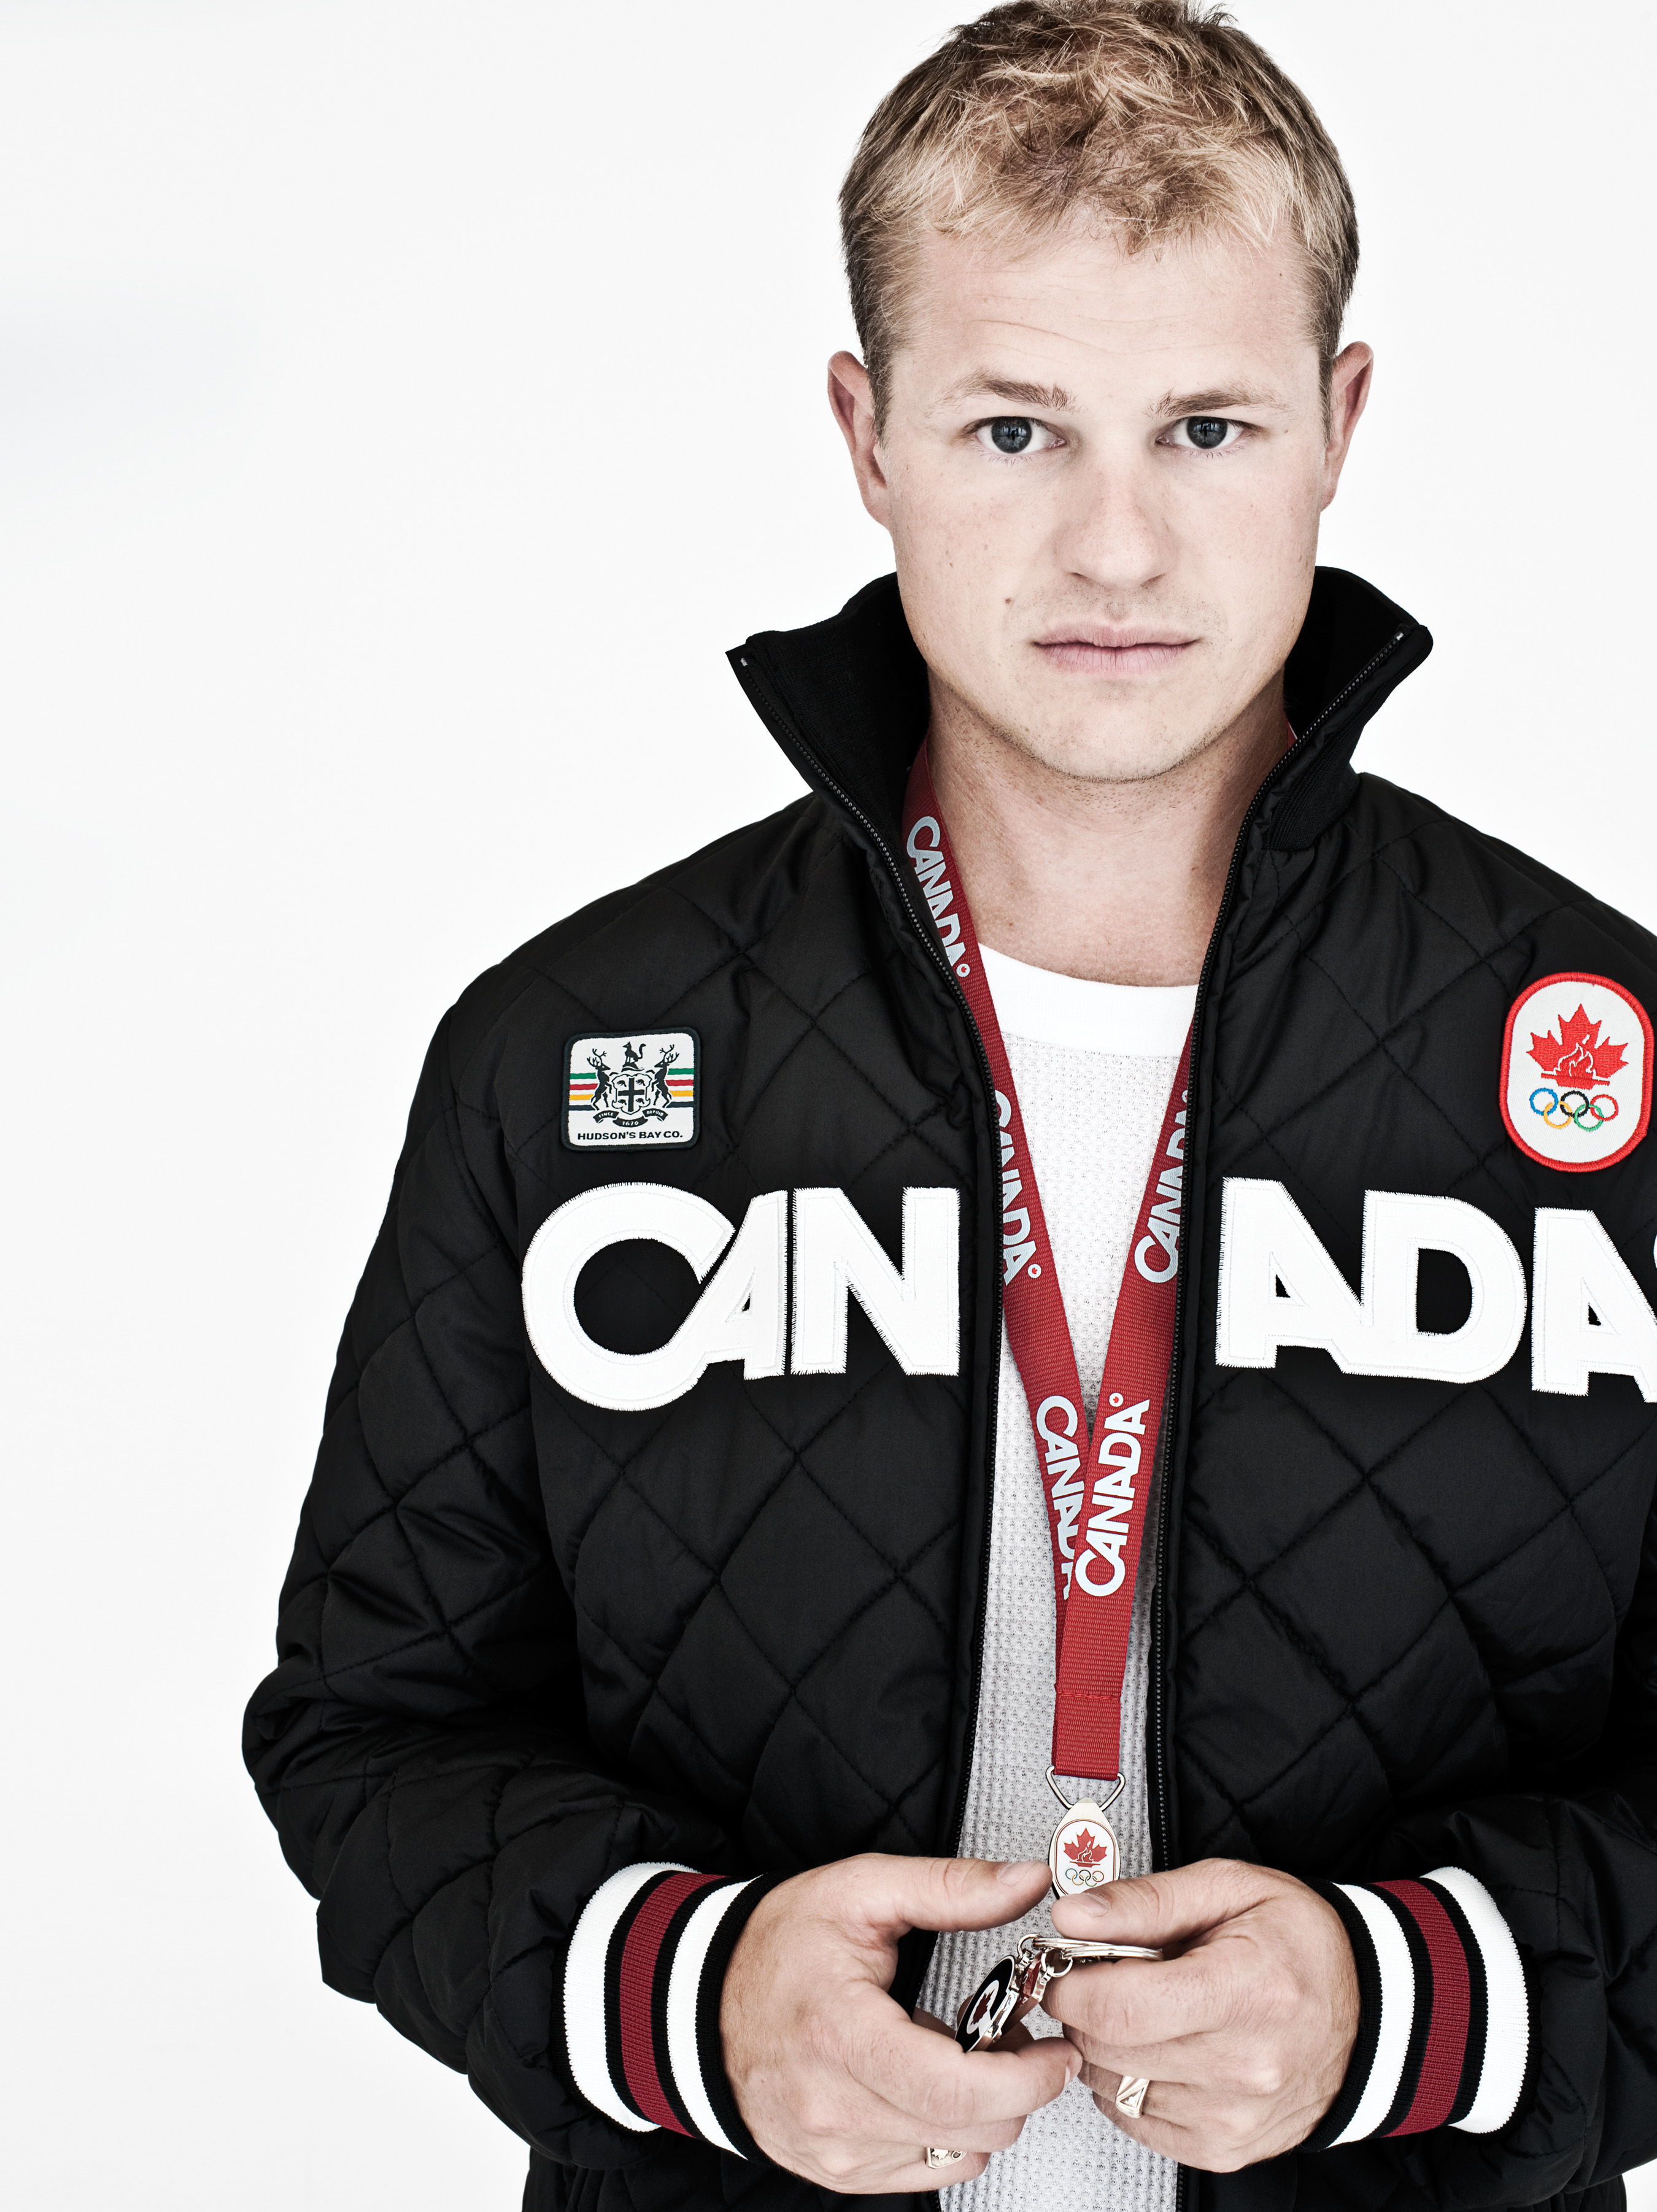 2010 Canadian Olympic Team Retail Apparel unveiled today